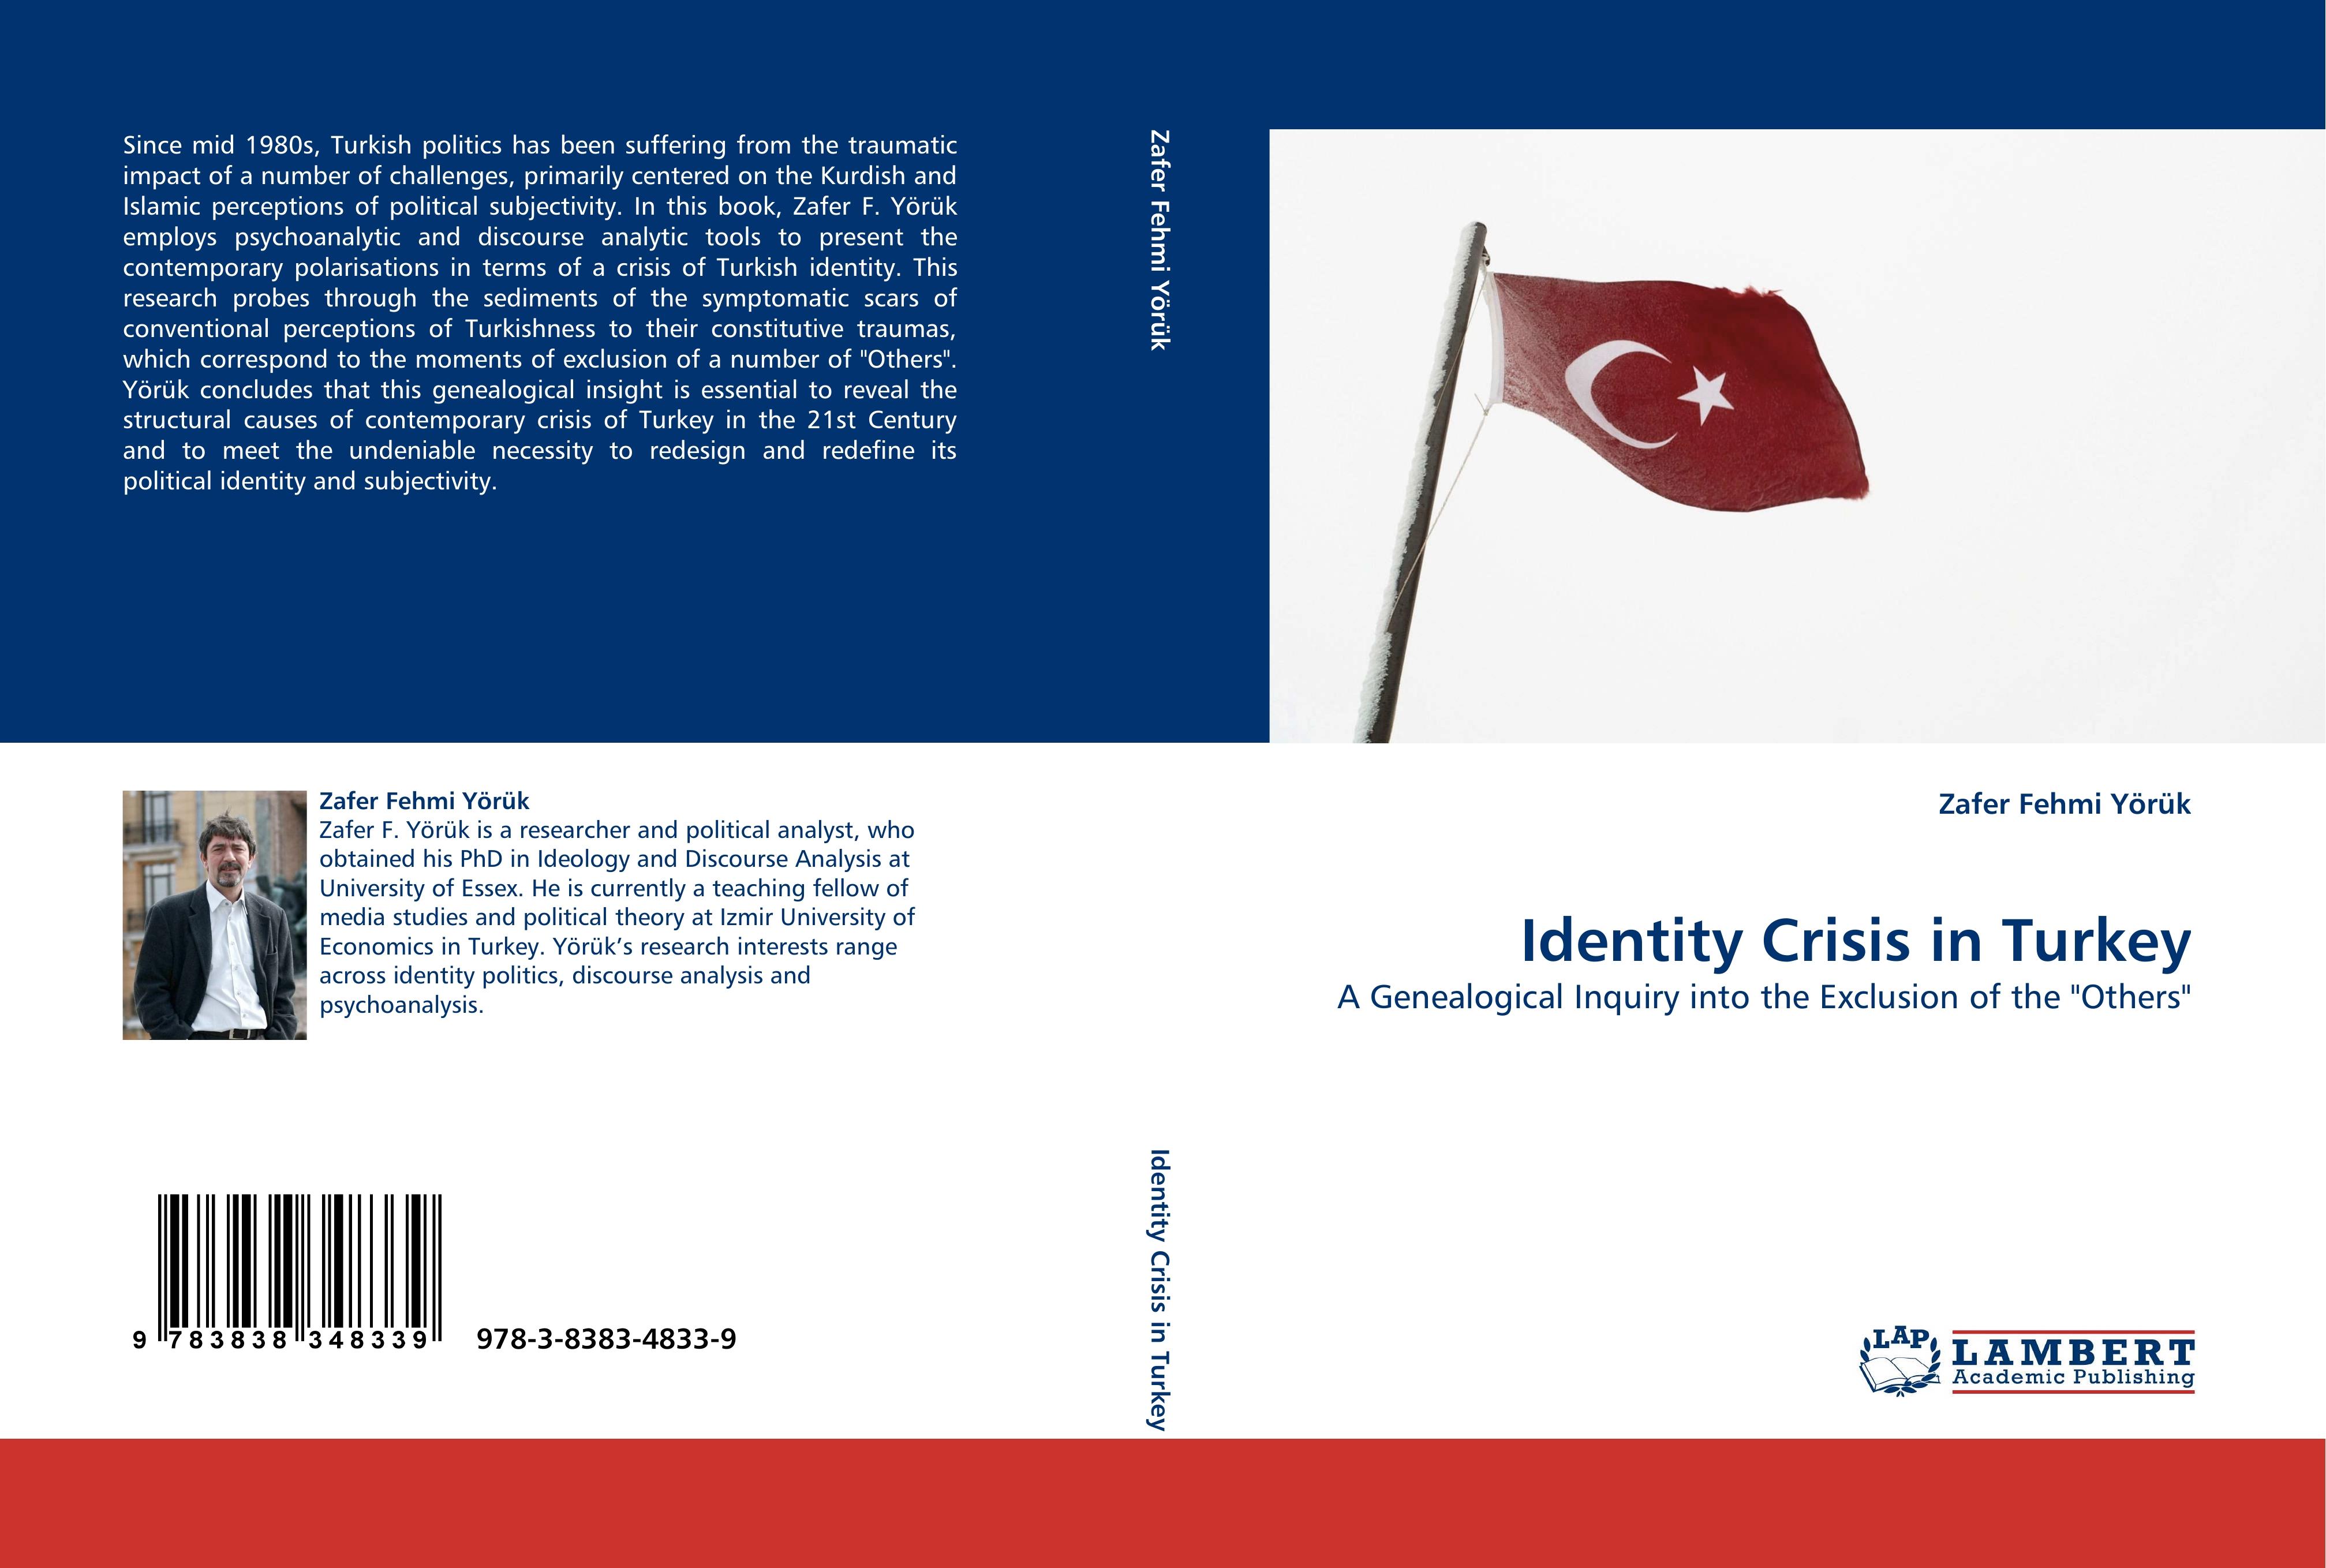 Identity Crisis in Turkey / A Genealogical Inquiry into the Exclusion of the 